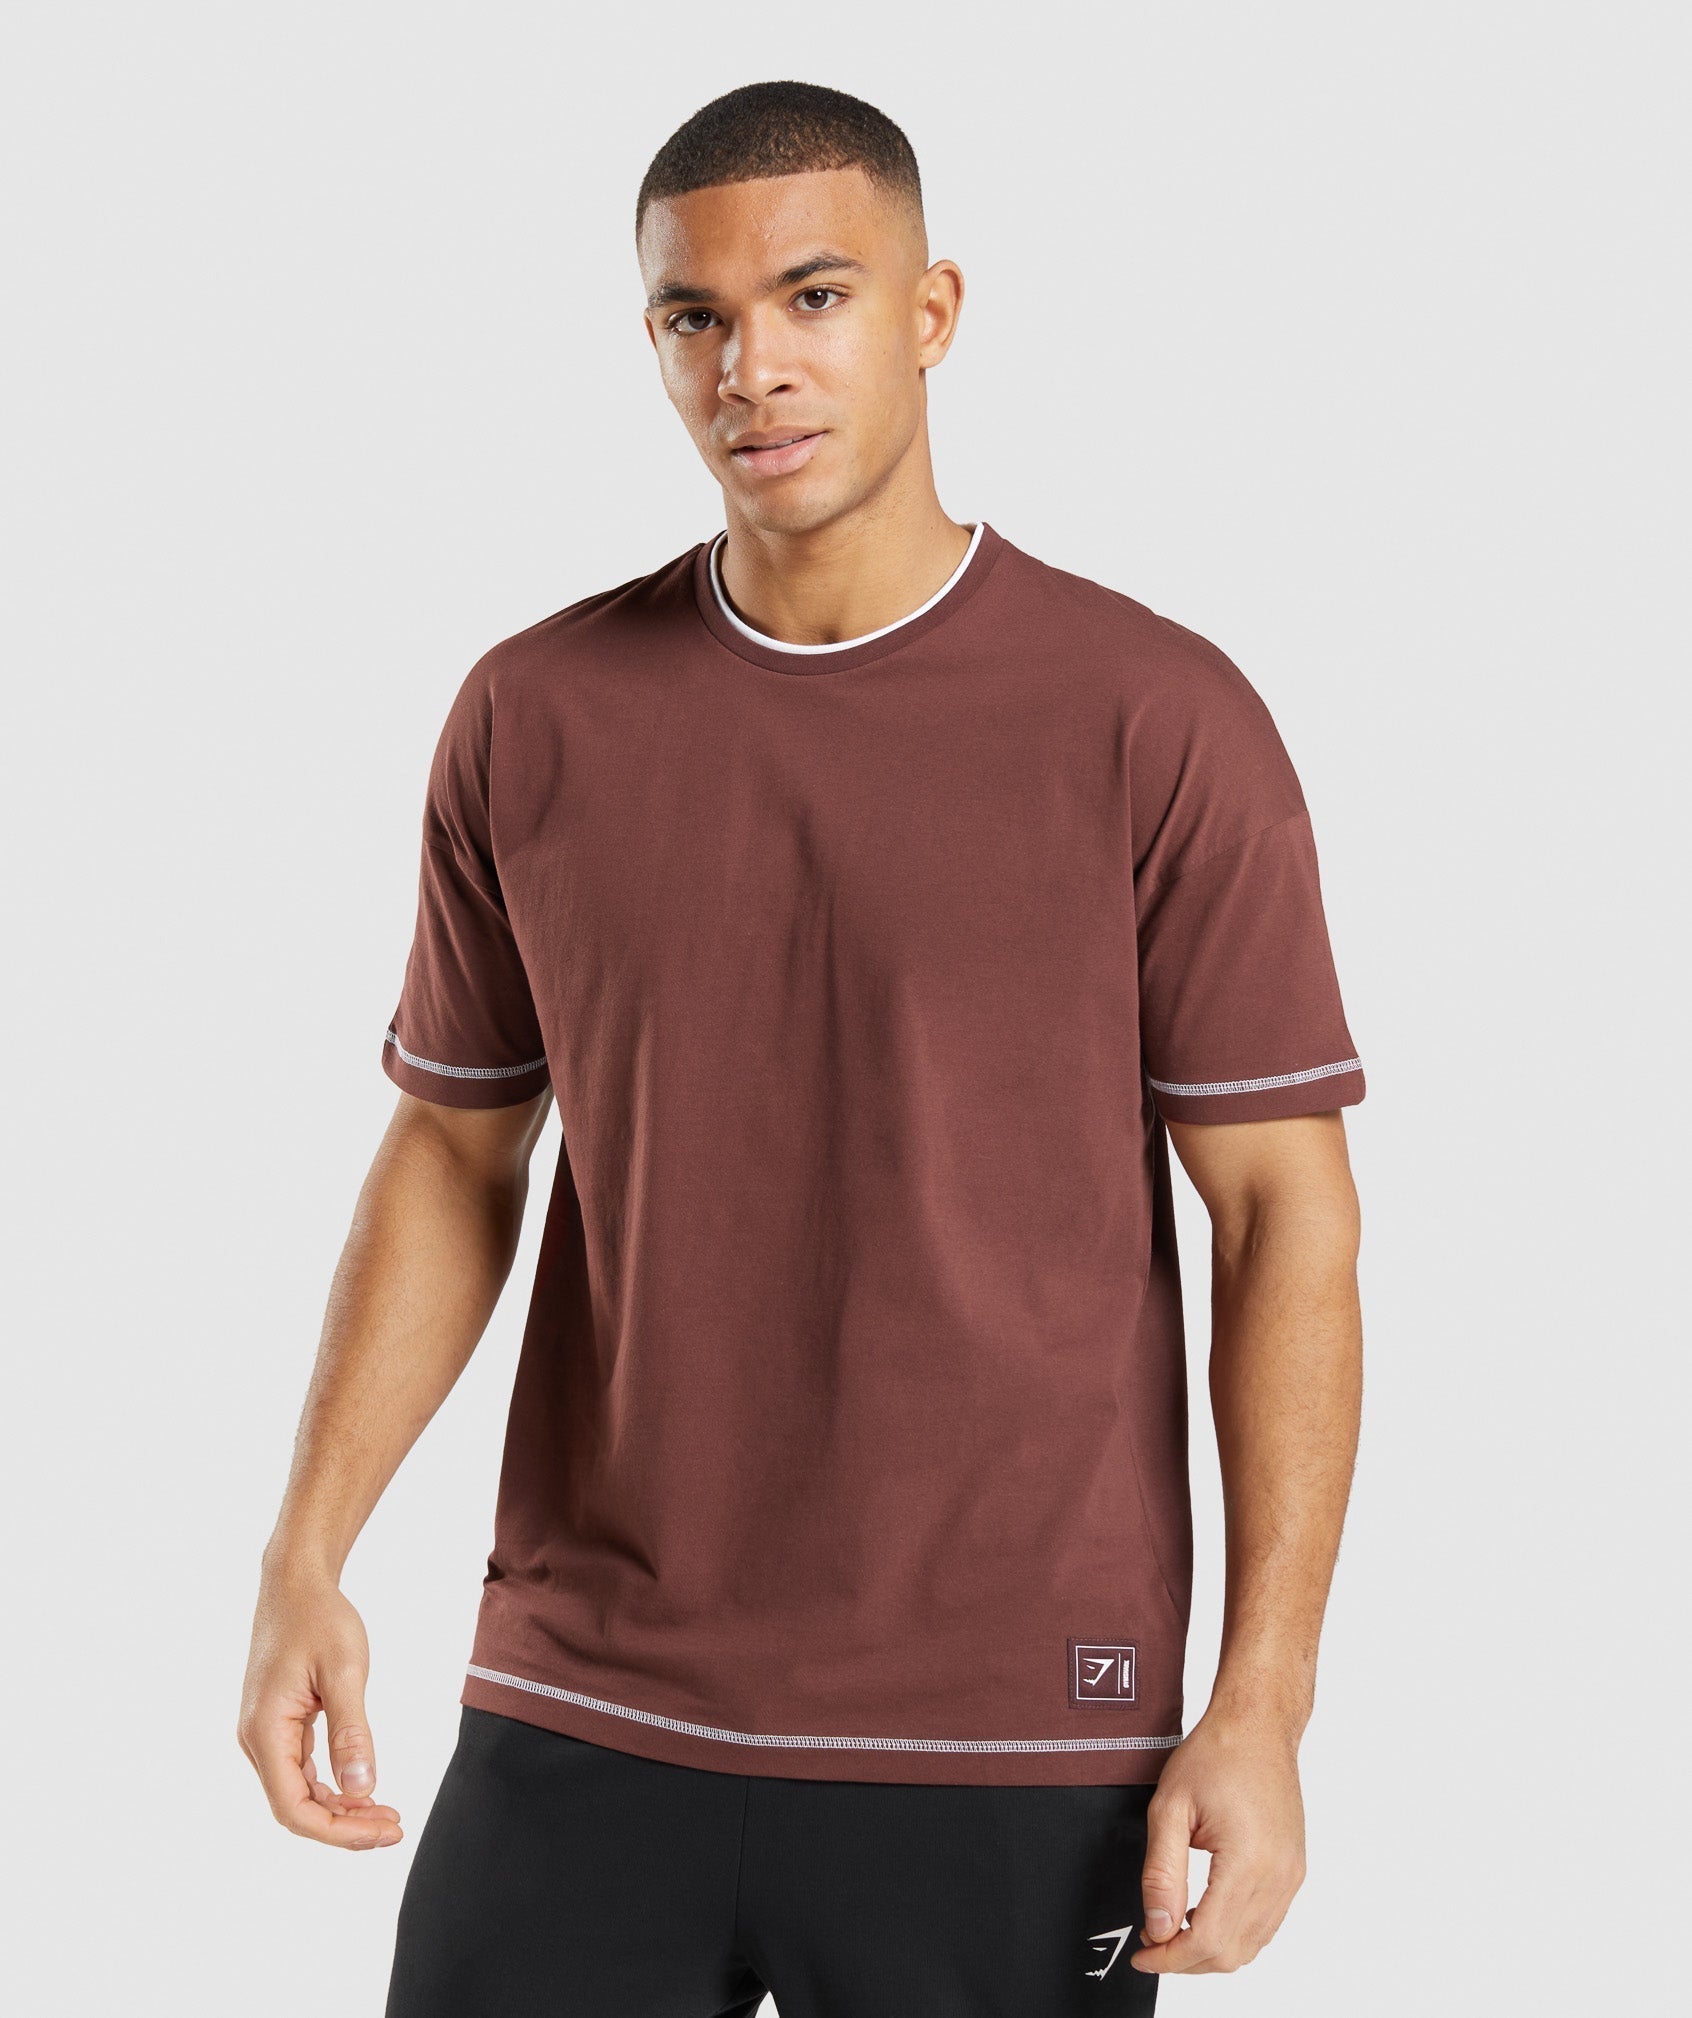 Recess T-Shirt in Cherry Brown/White